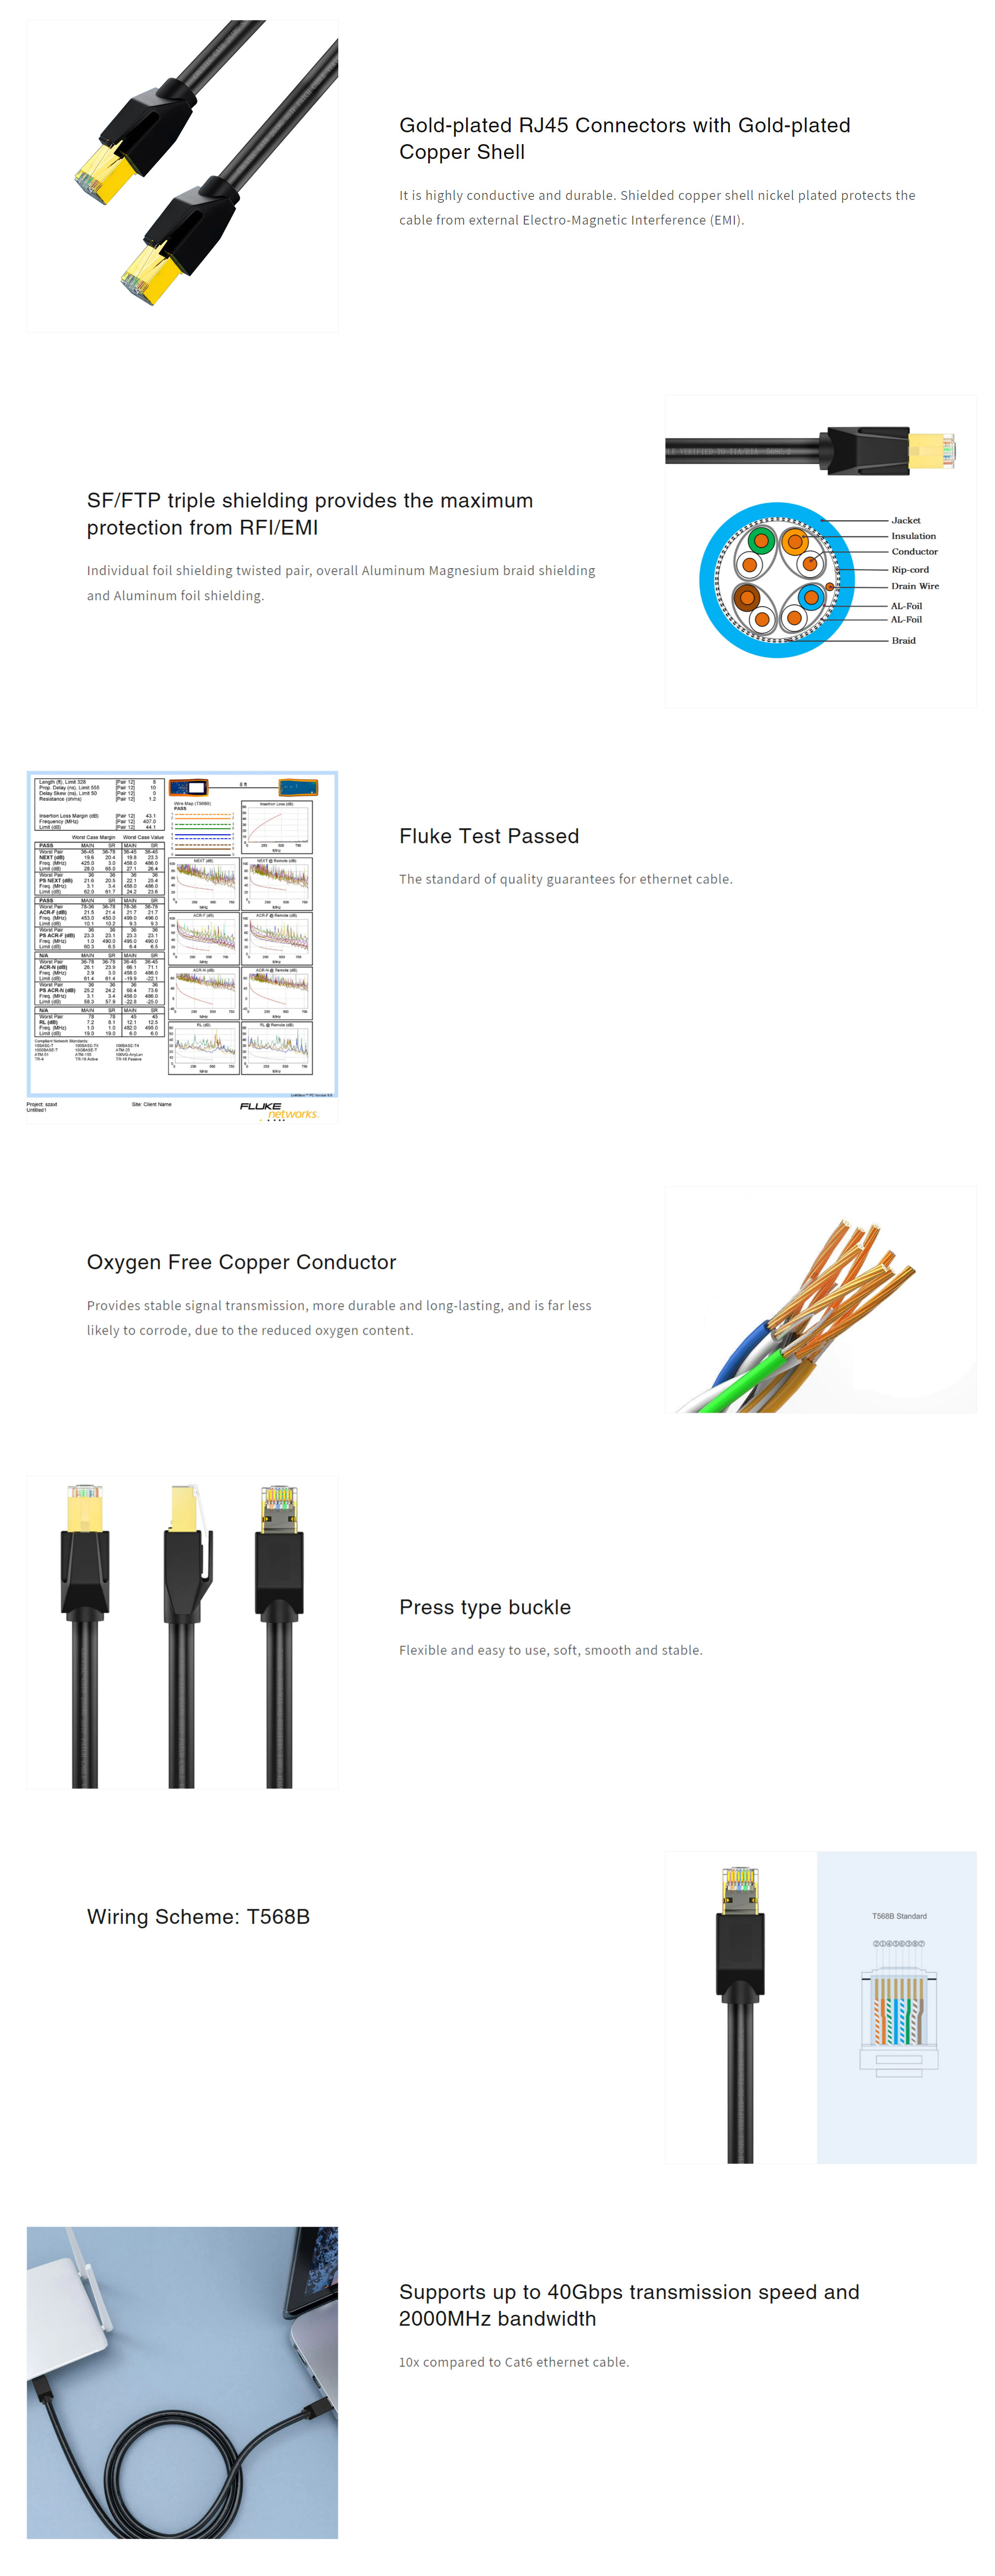 A large marketing image providing additional information about the product Cruxtec CAT8 0.3m 40GbE SF/FTP Triple Shielding Ethernet Cable Black - Additional alt info not provided